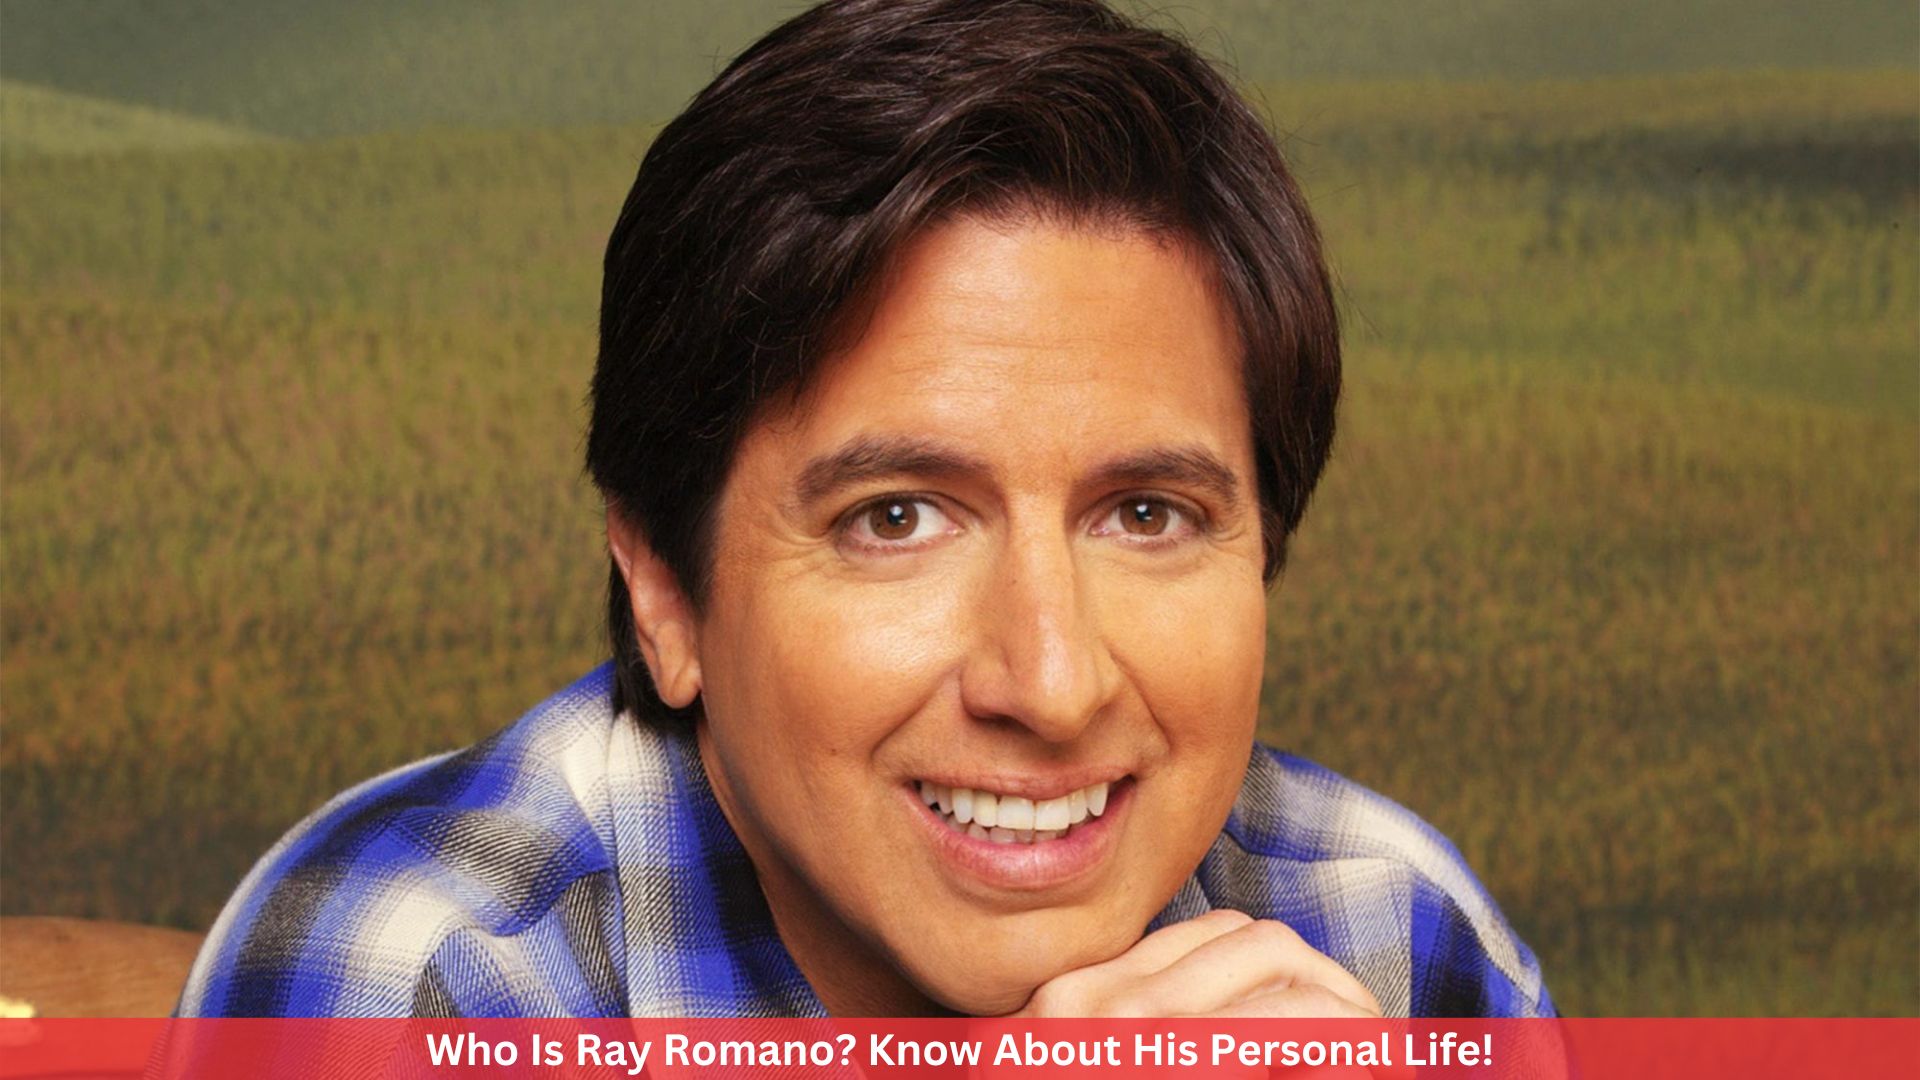 Who Is Ray Romano? Know About His Personal Life!